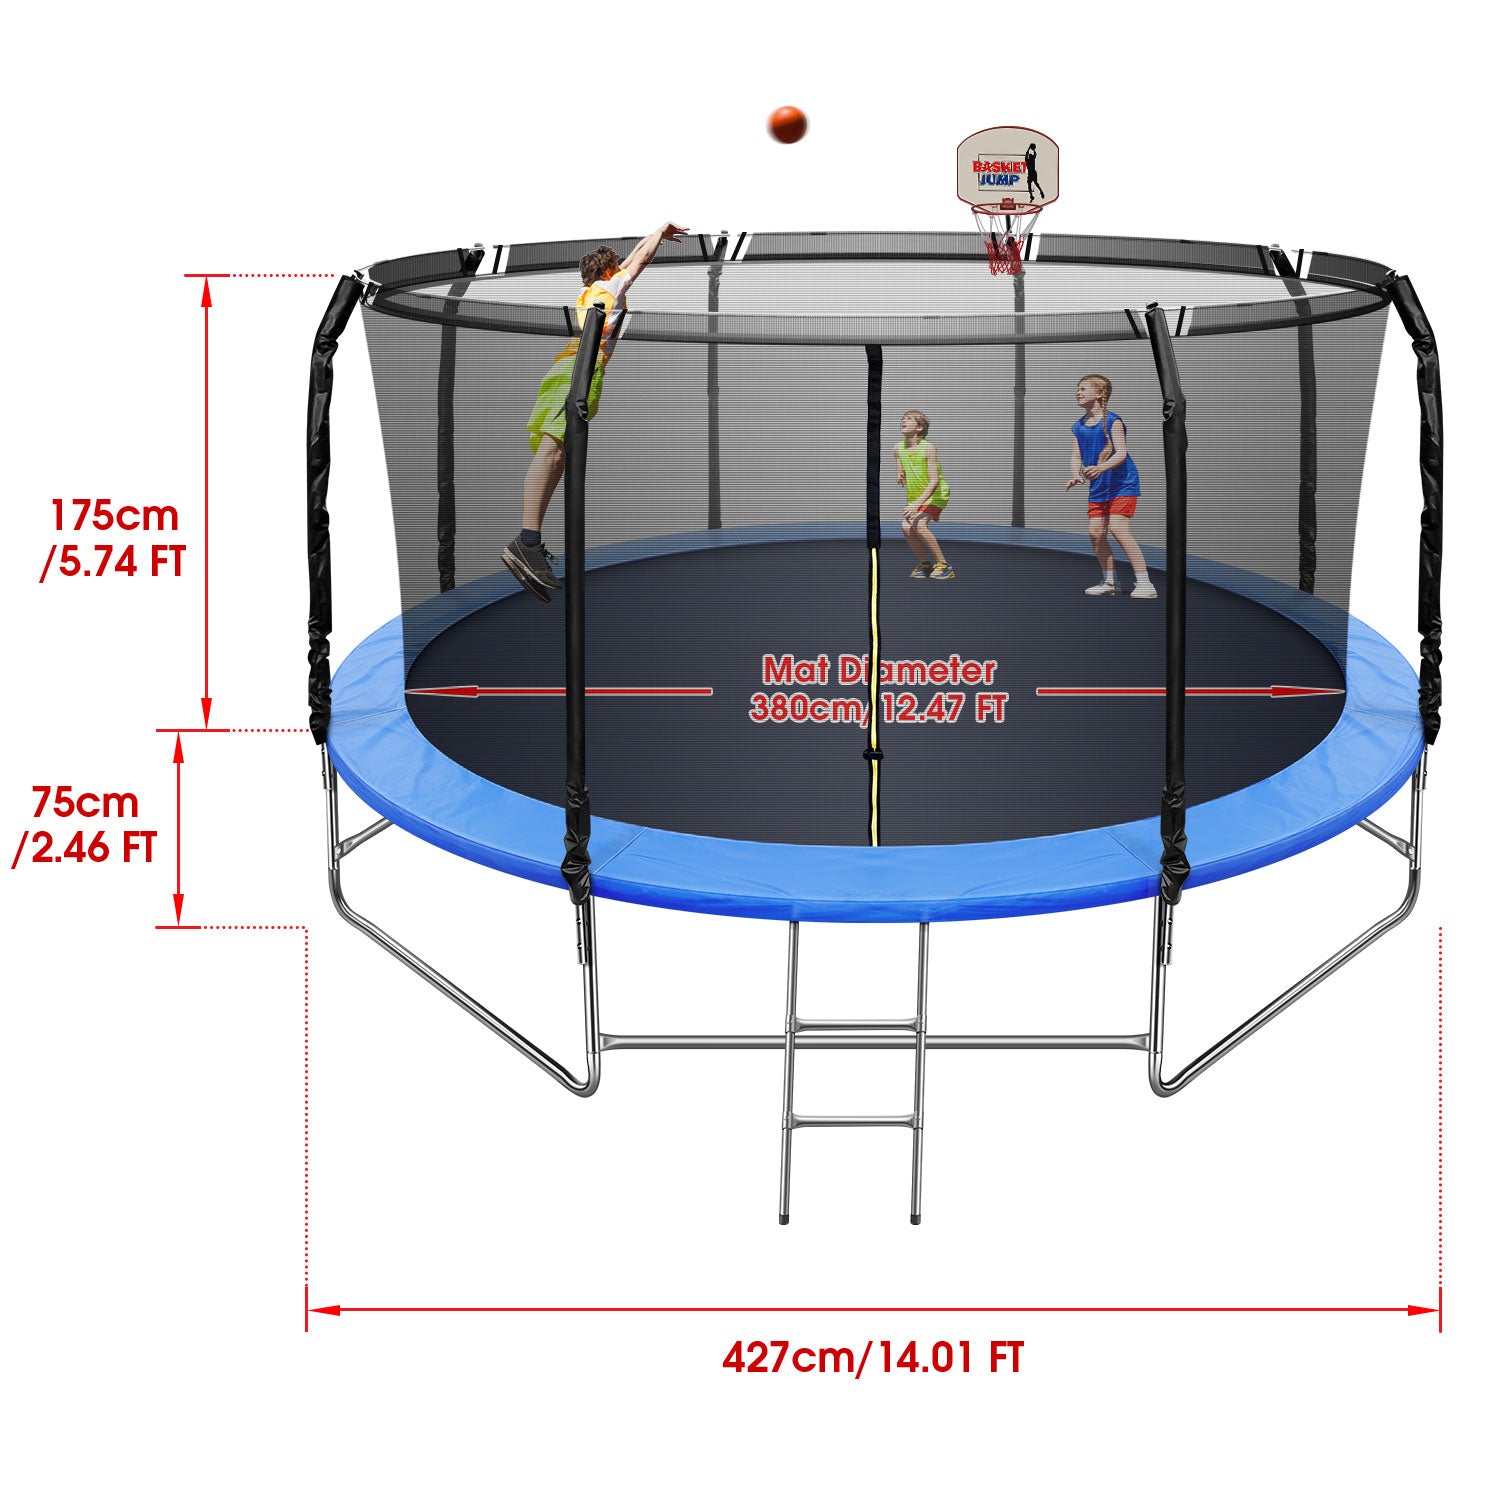 TRIPLETREE 14FT Trampoline With Safety Enclosure Net, Basketball Hoop & Ladder, Suitable For Kids & Adults, 800LBS